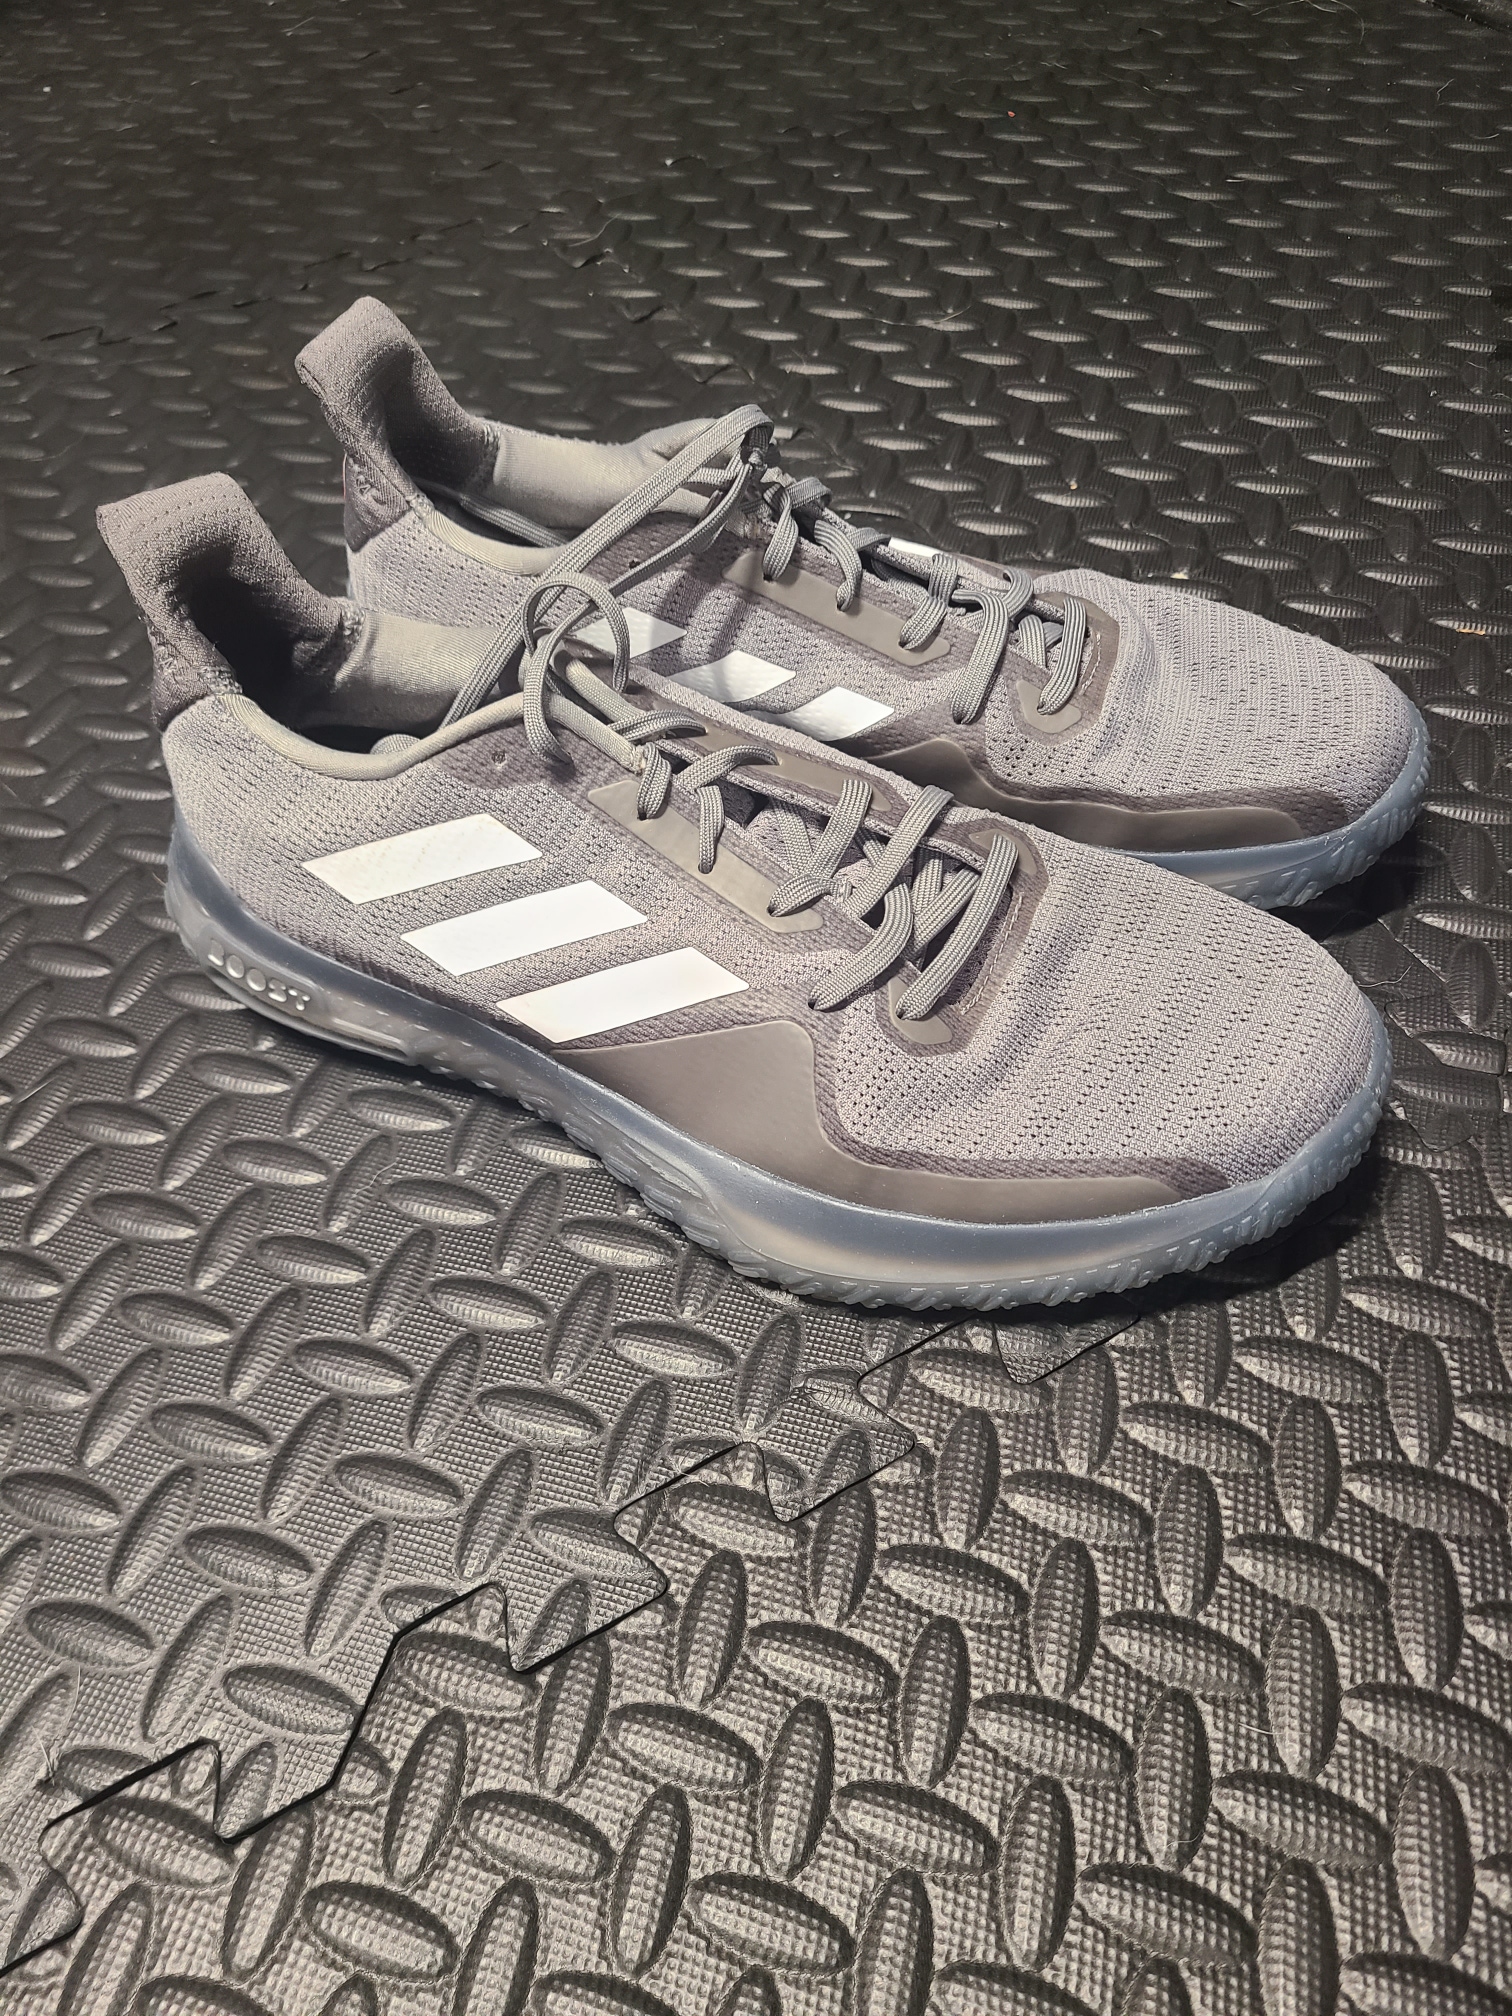 New Men's Adidas FitBoost Shoes